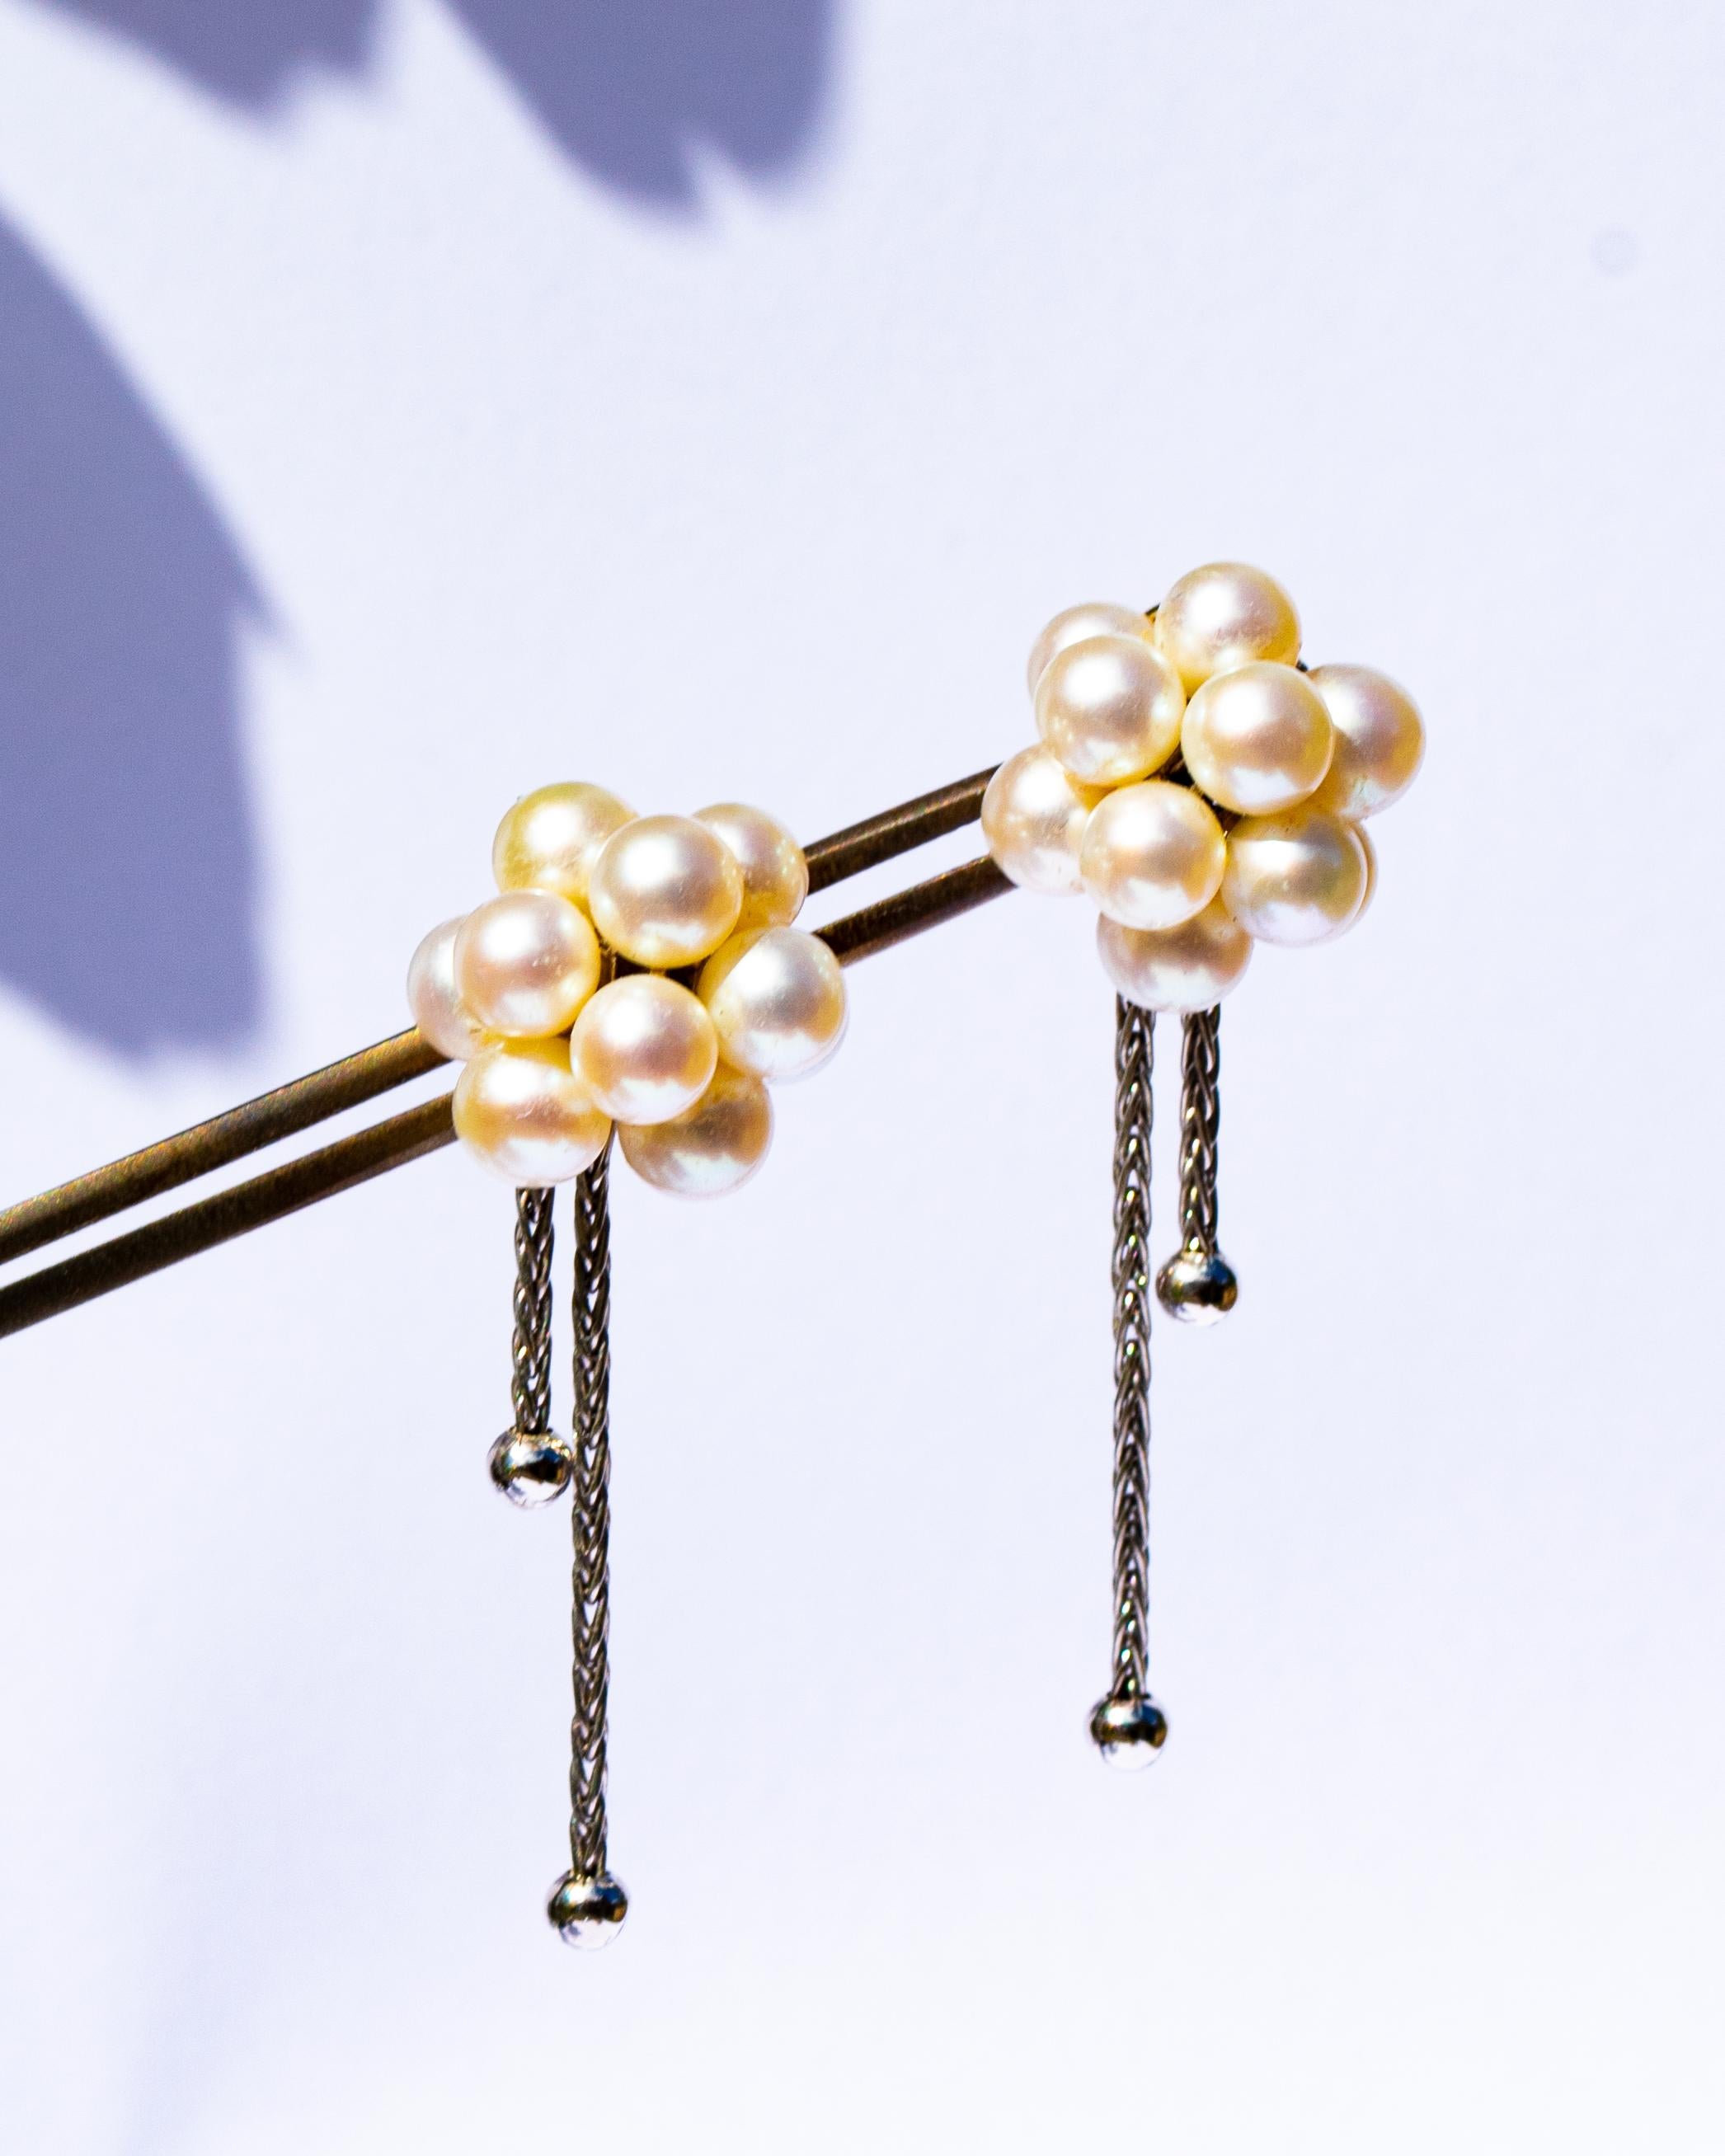 Pair of Boucheron 18 carat gold and pearl cluster earrings, each suspended with a pair of chains, 3cm drop, 8.1g gross